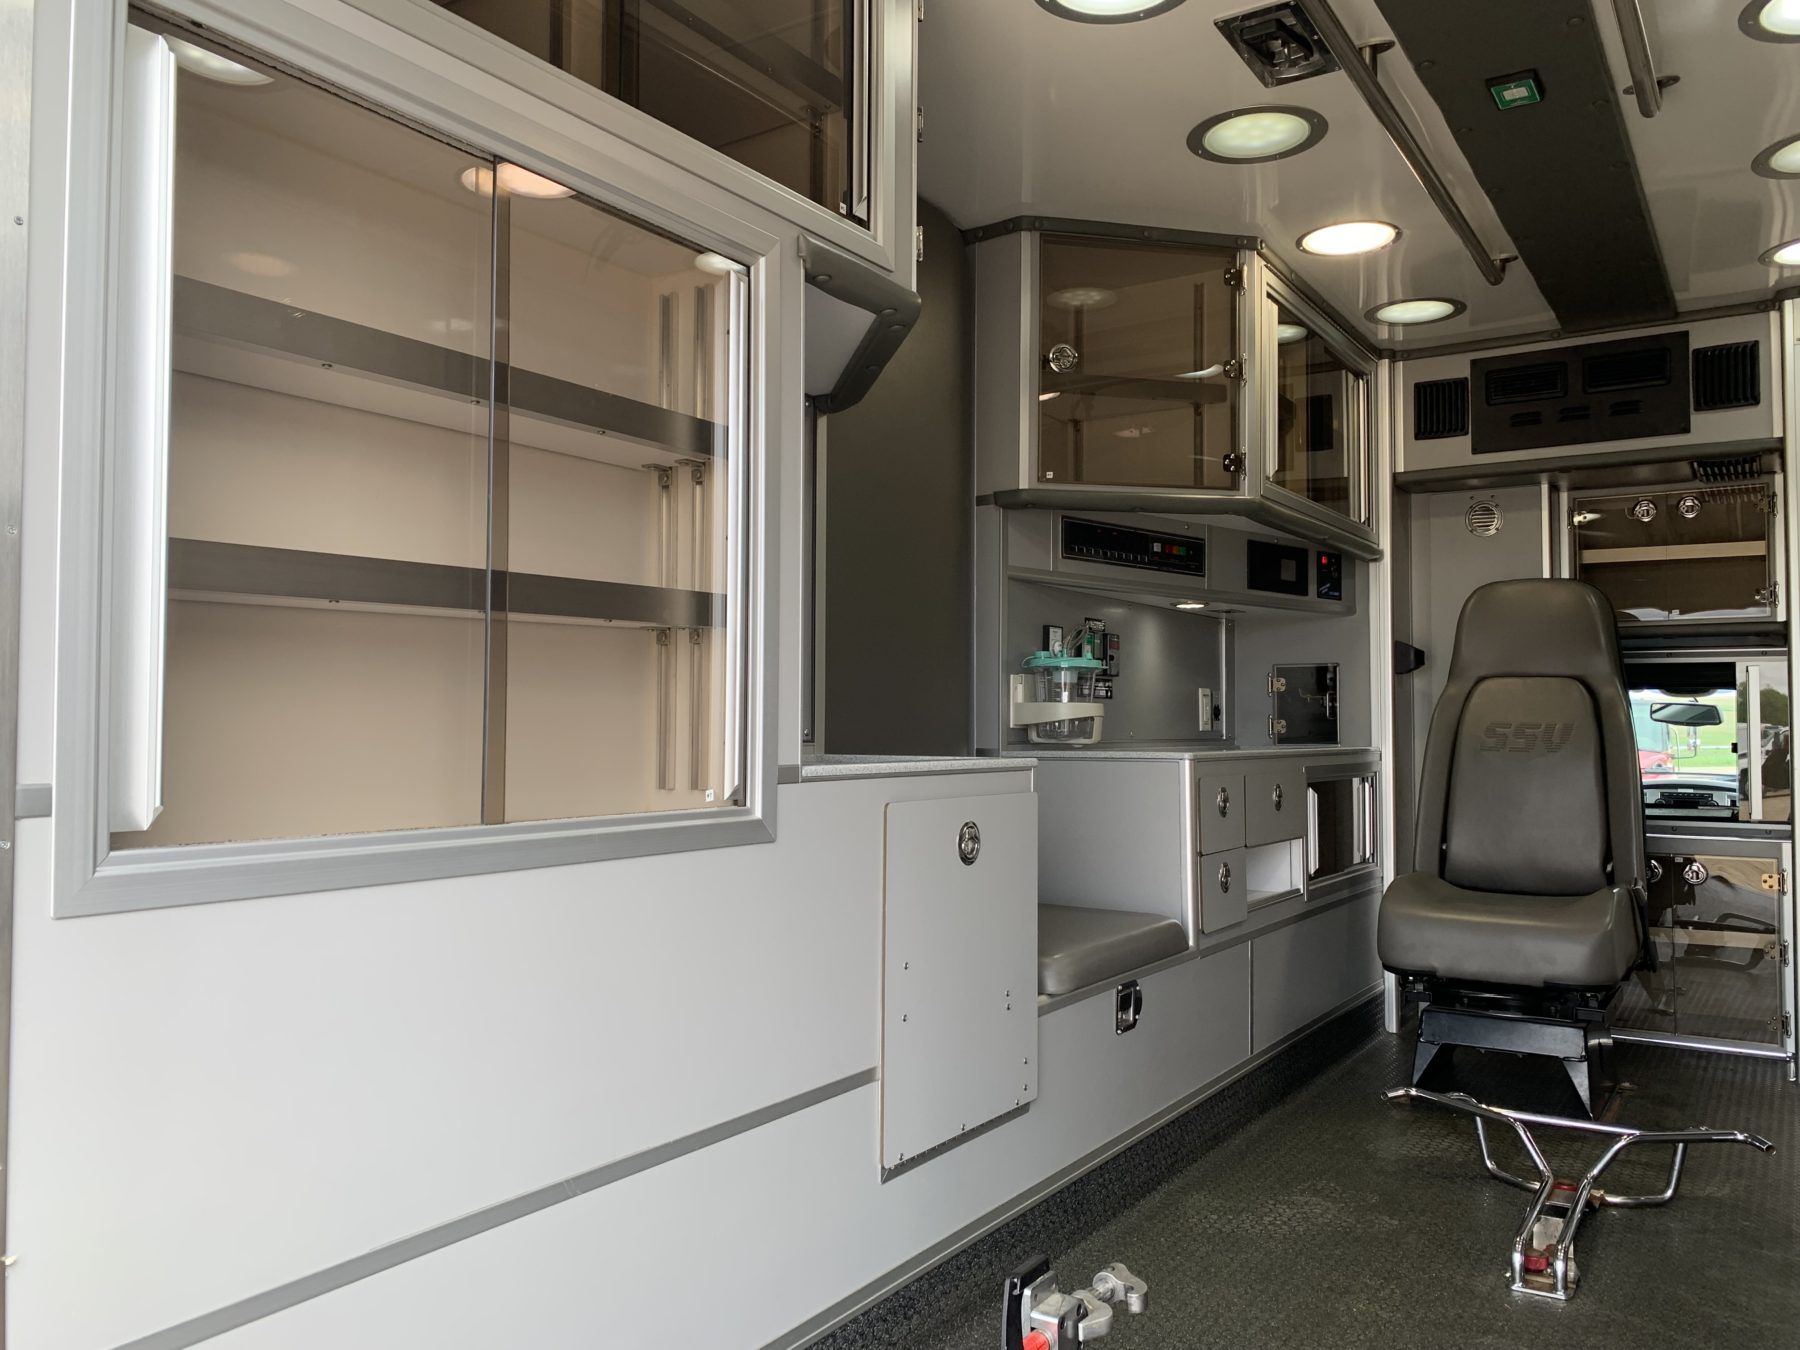 2009 Ram 4500 Heavy Duty Ambulance For Sale – Picture 10